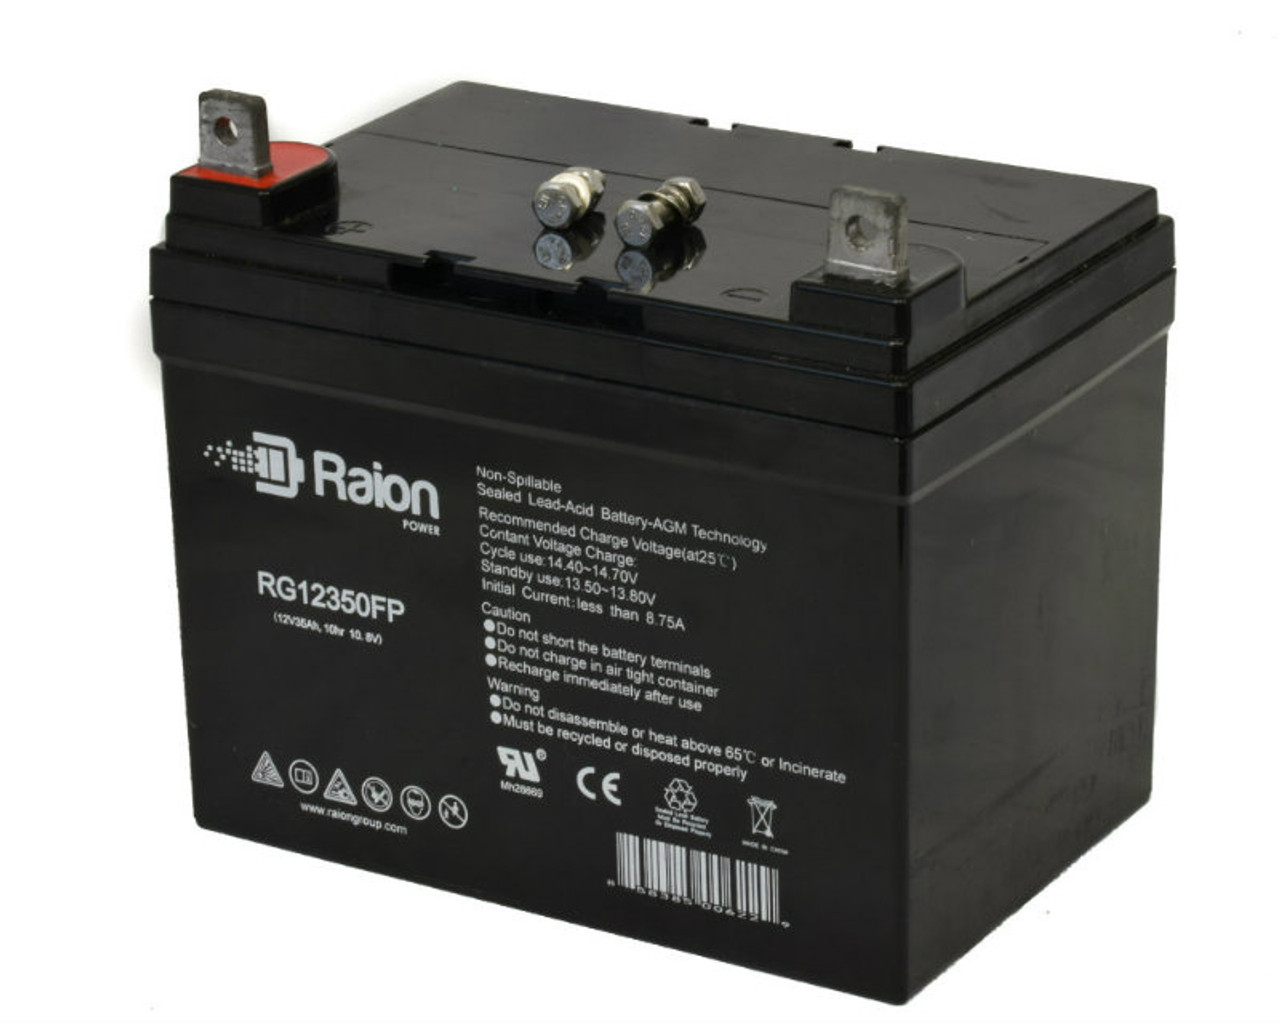 Raion Power Replacement 12V 35Ah RG12350FP Mobility Scooter Battery for Bruno PWC-2200